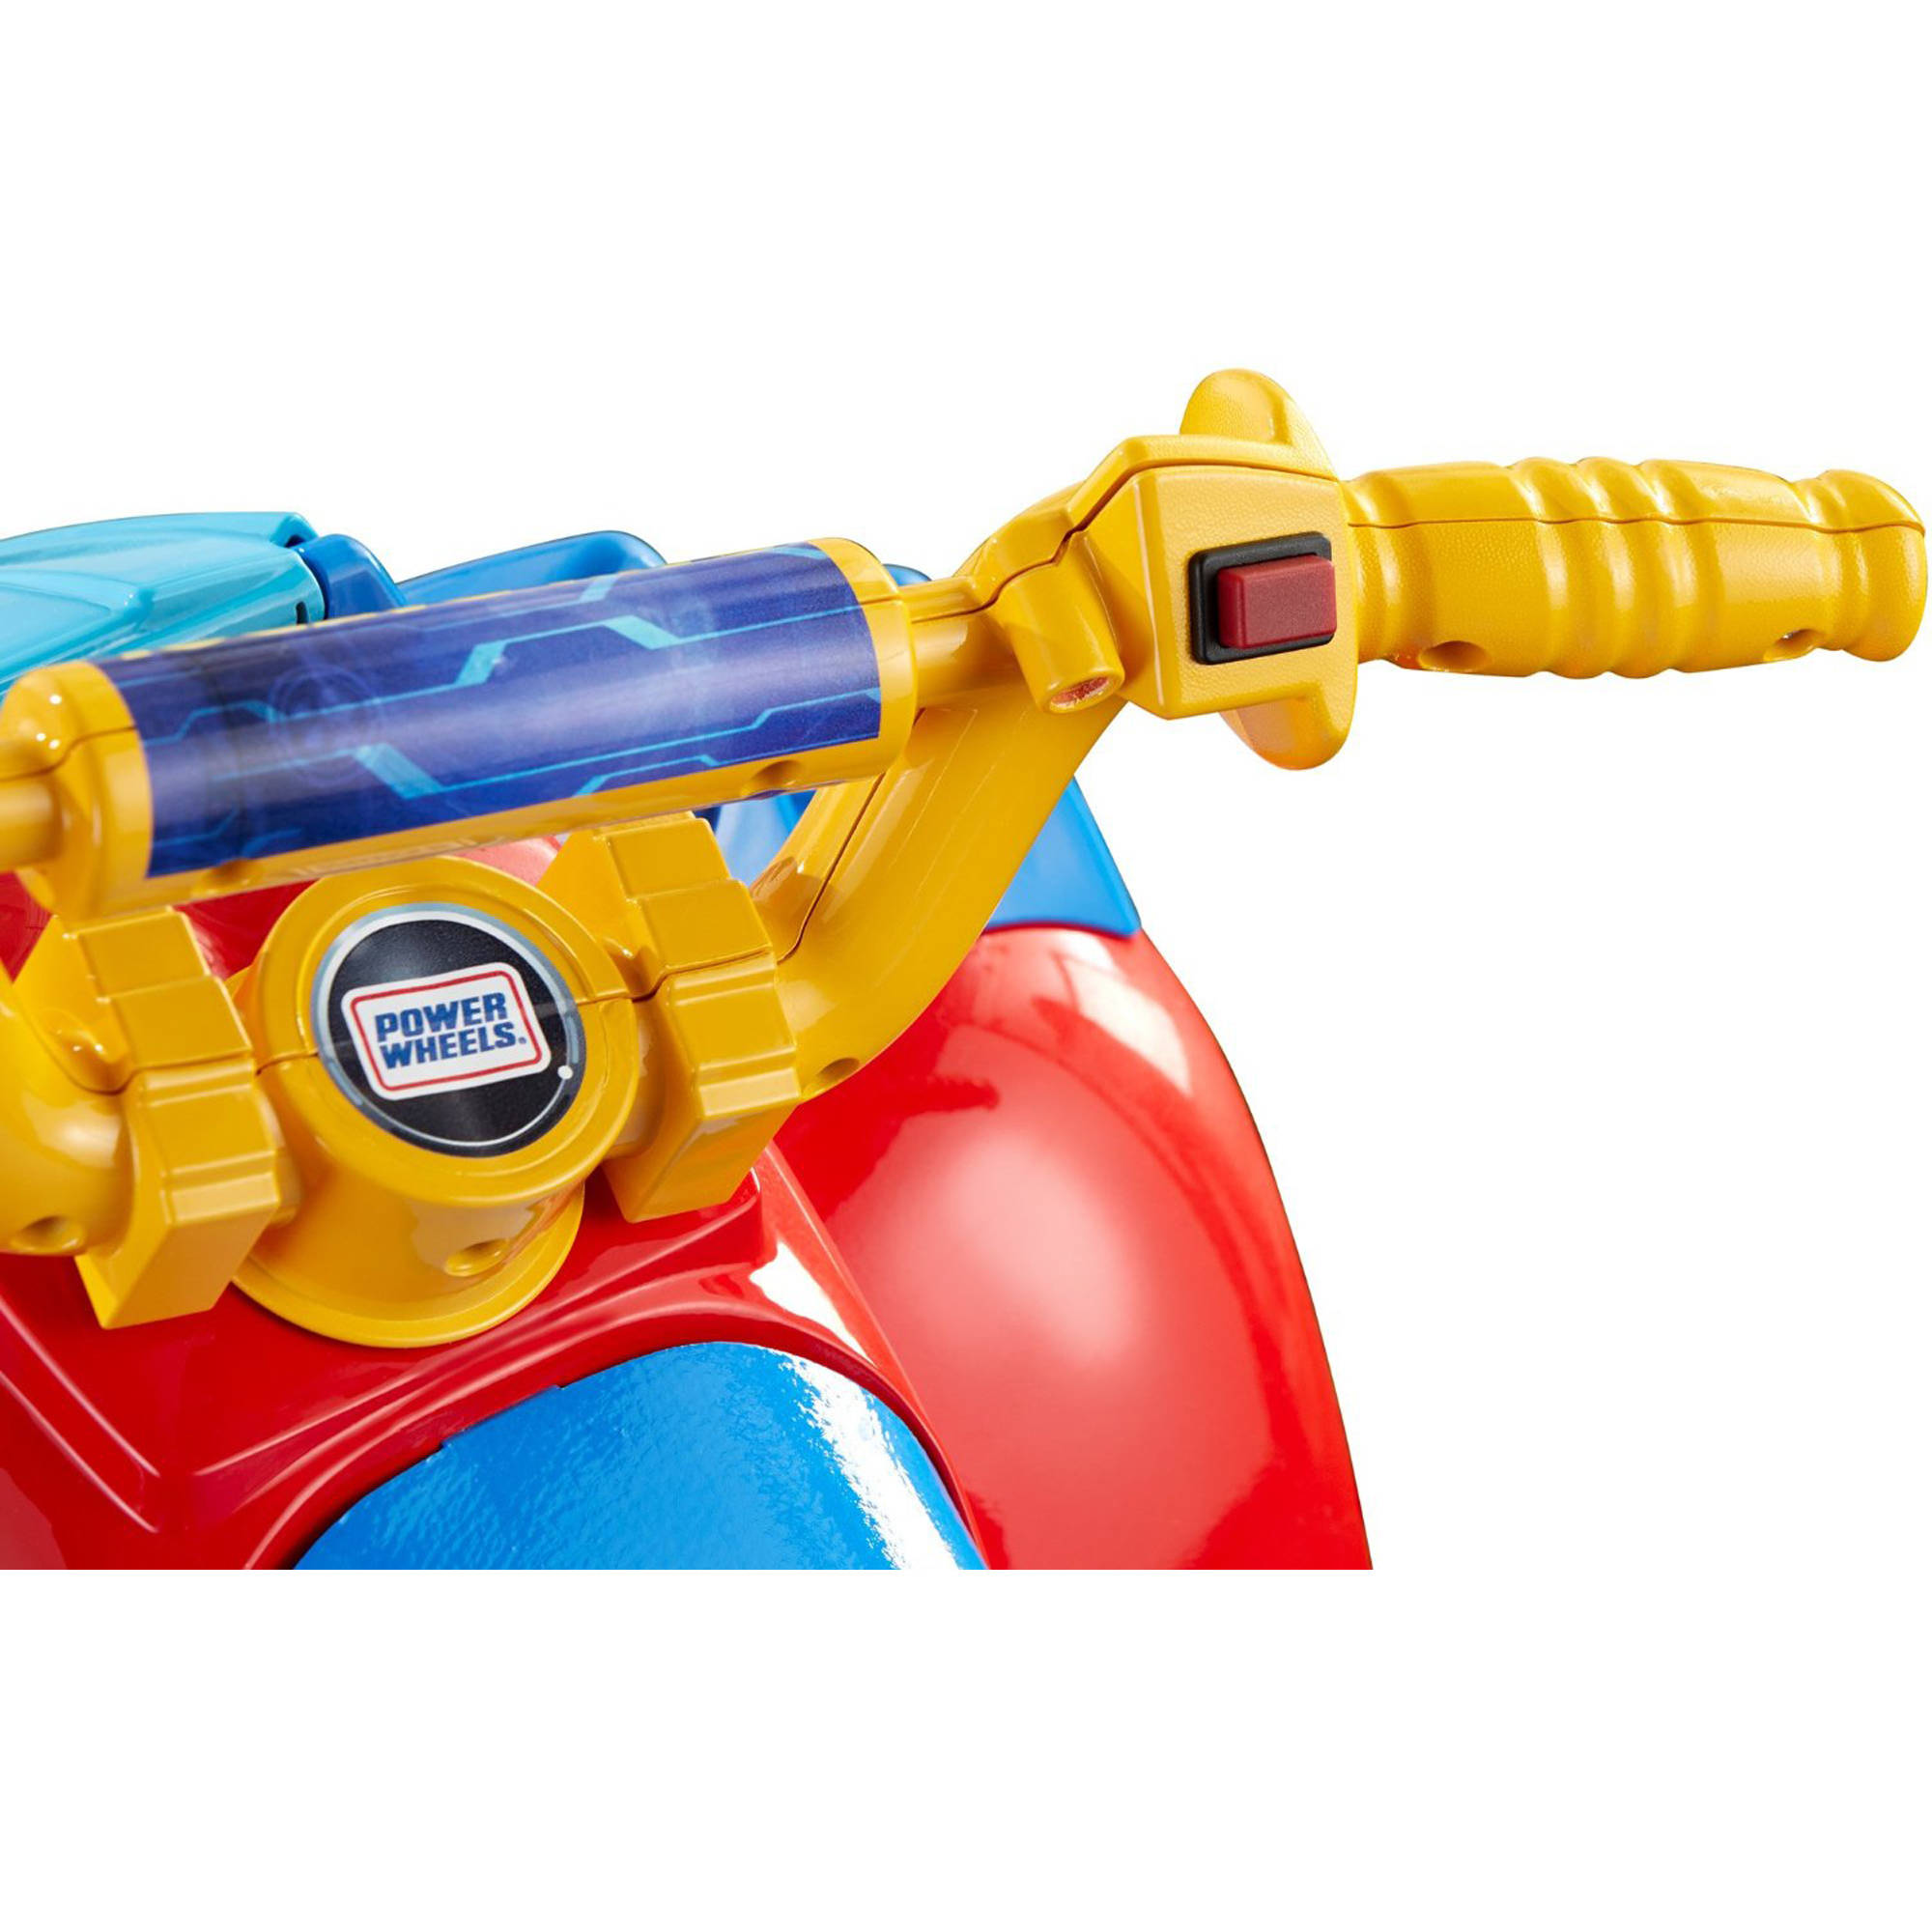 Power Wheels PAW Patrol Lil' Quad 6-Volt Battery-Powered Vehicle - image 4 of 9